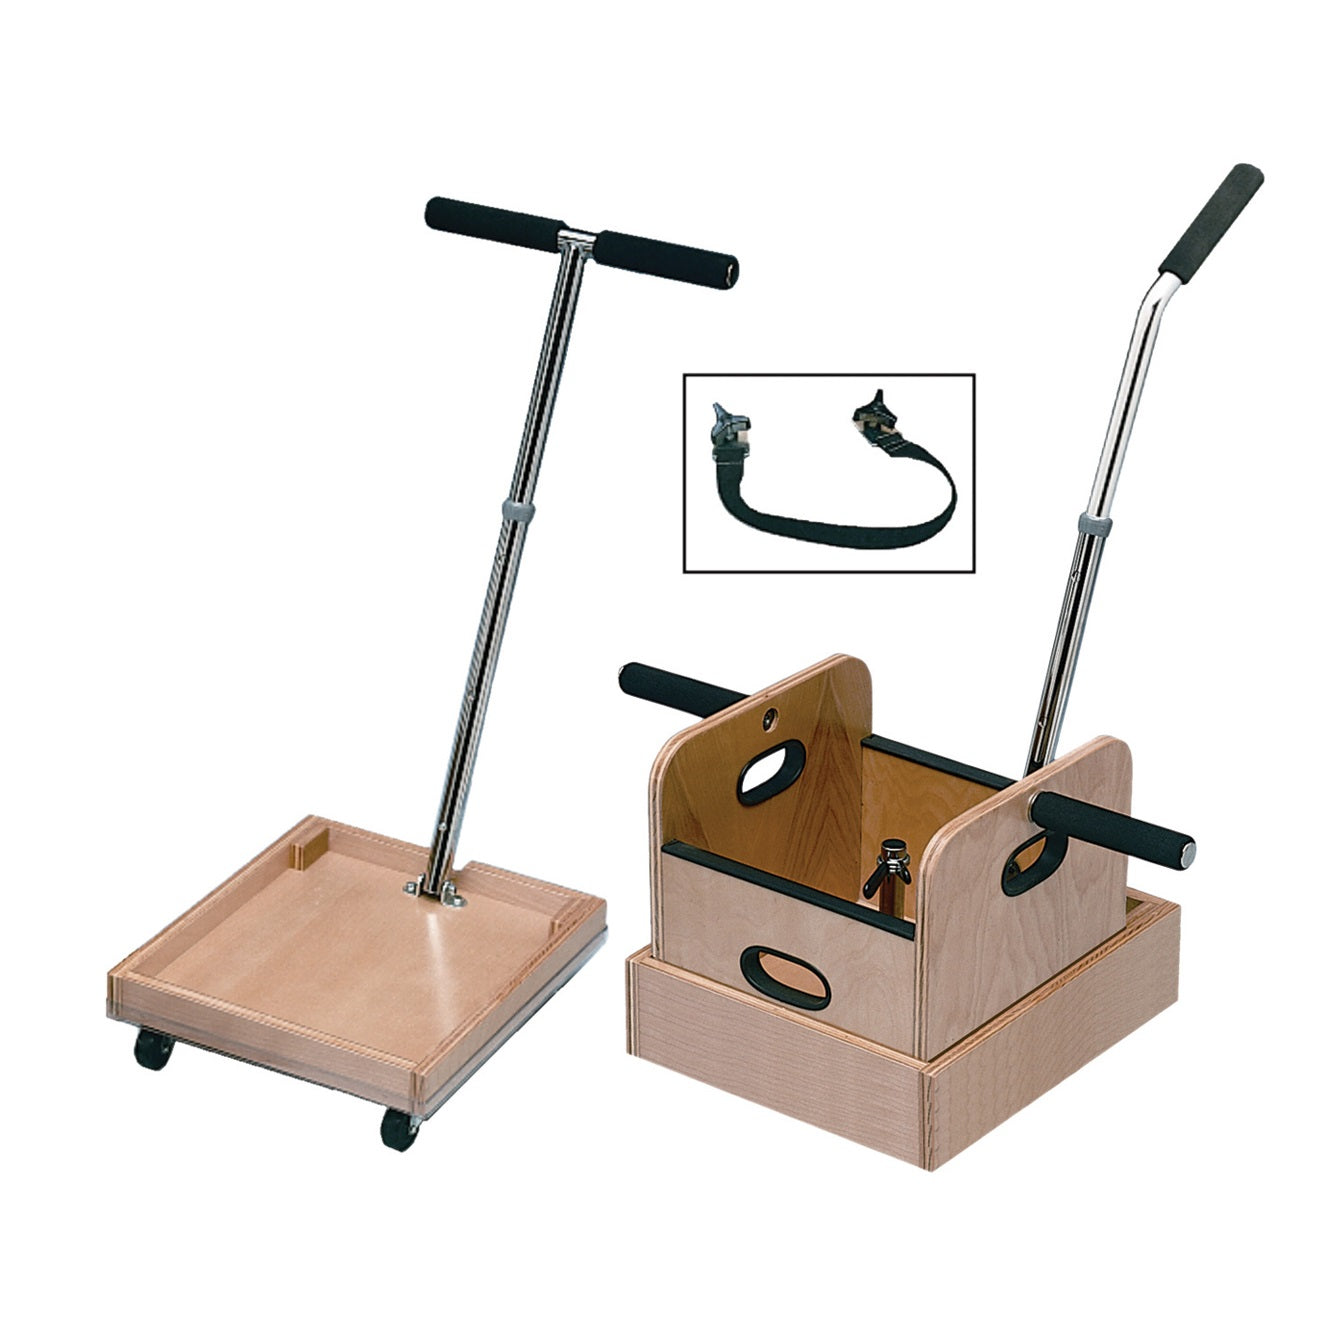 Mobile Weighted cart with T-handle, accessory box, and sled with straight handle